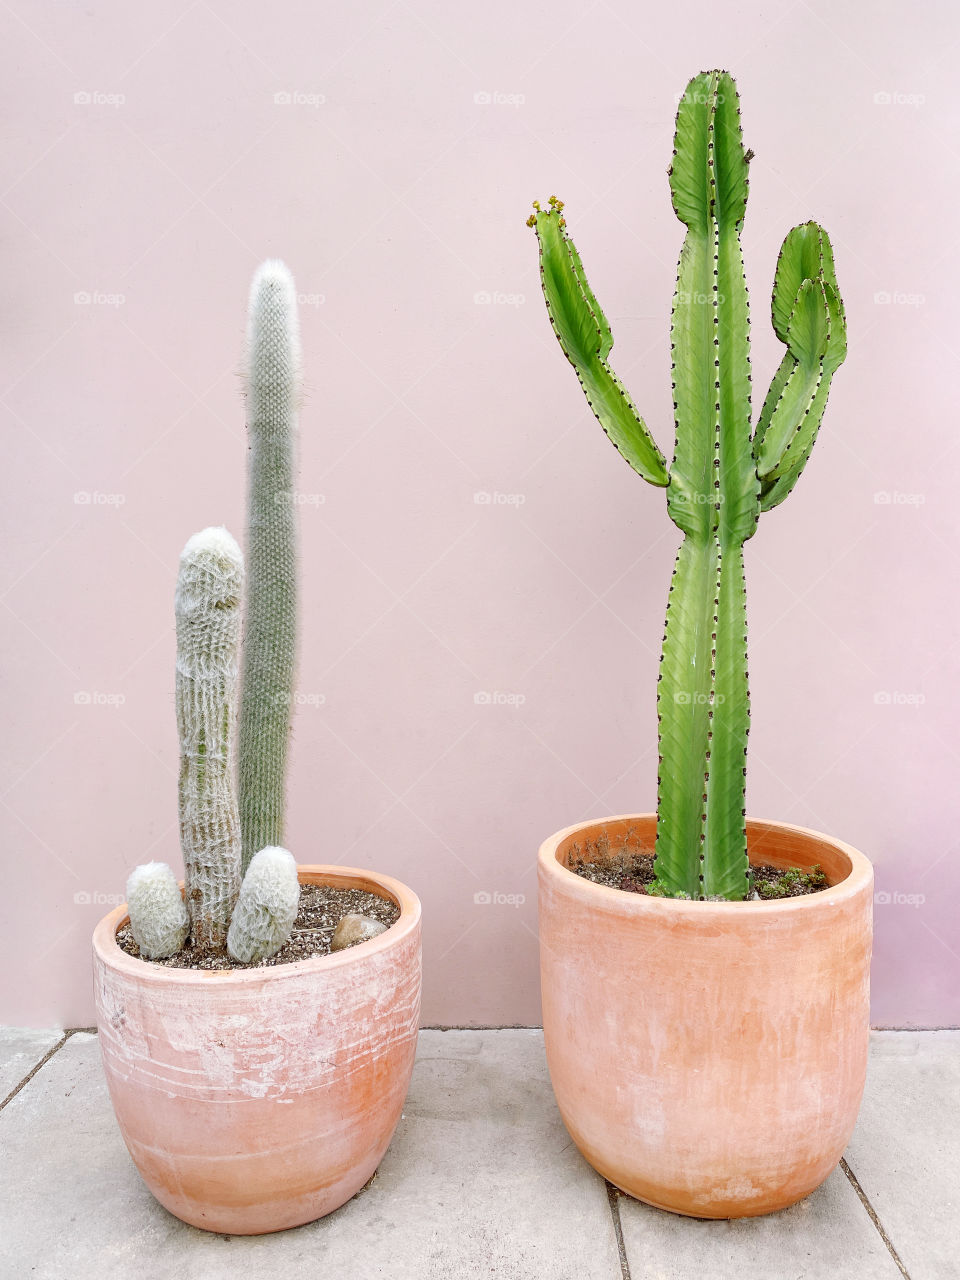 Cactus plants next to the pink wall